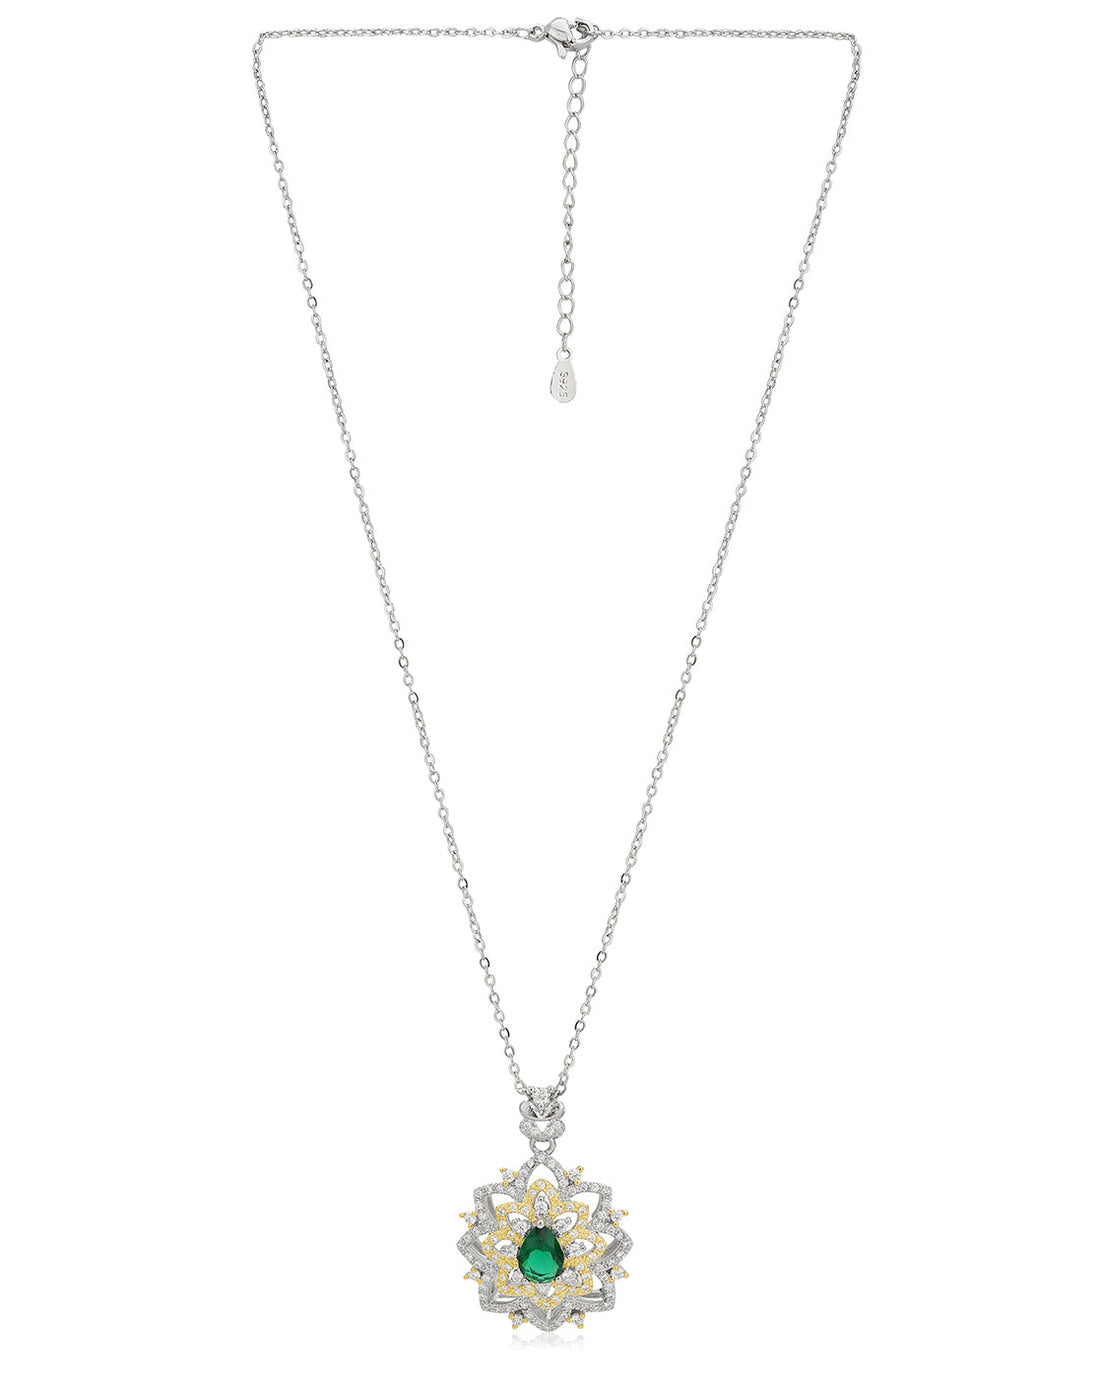 Premium Rhodium Plated With Gold Embellishment Cz Floral Pendant With Chain For Women